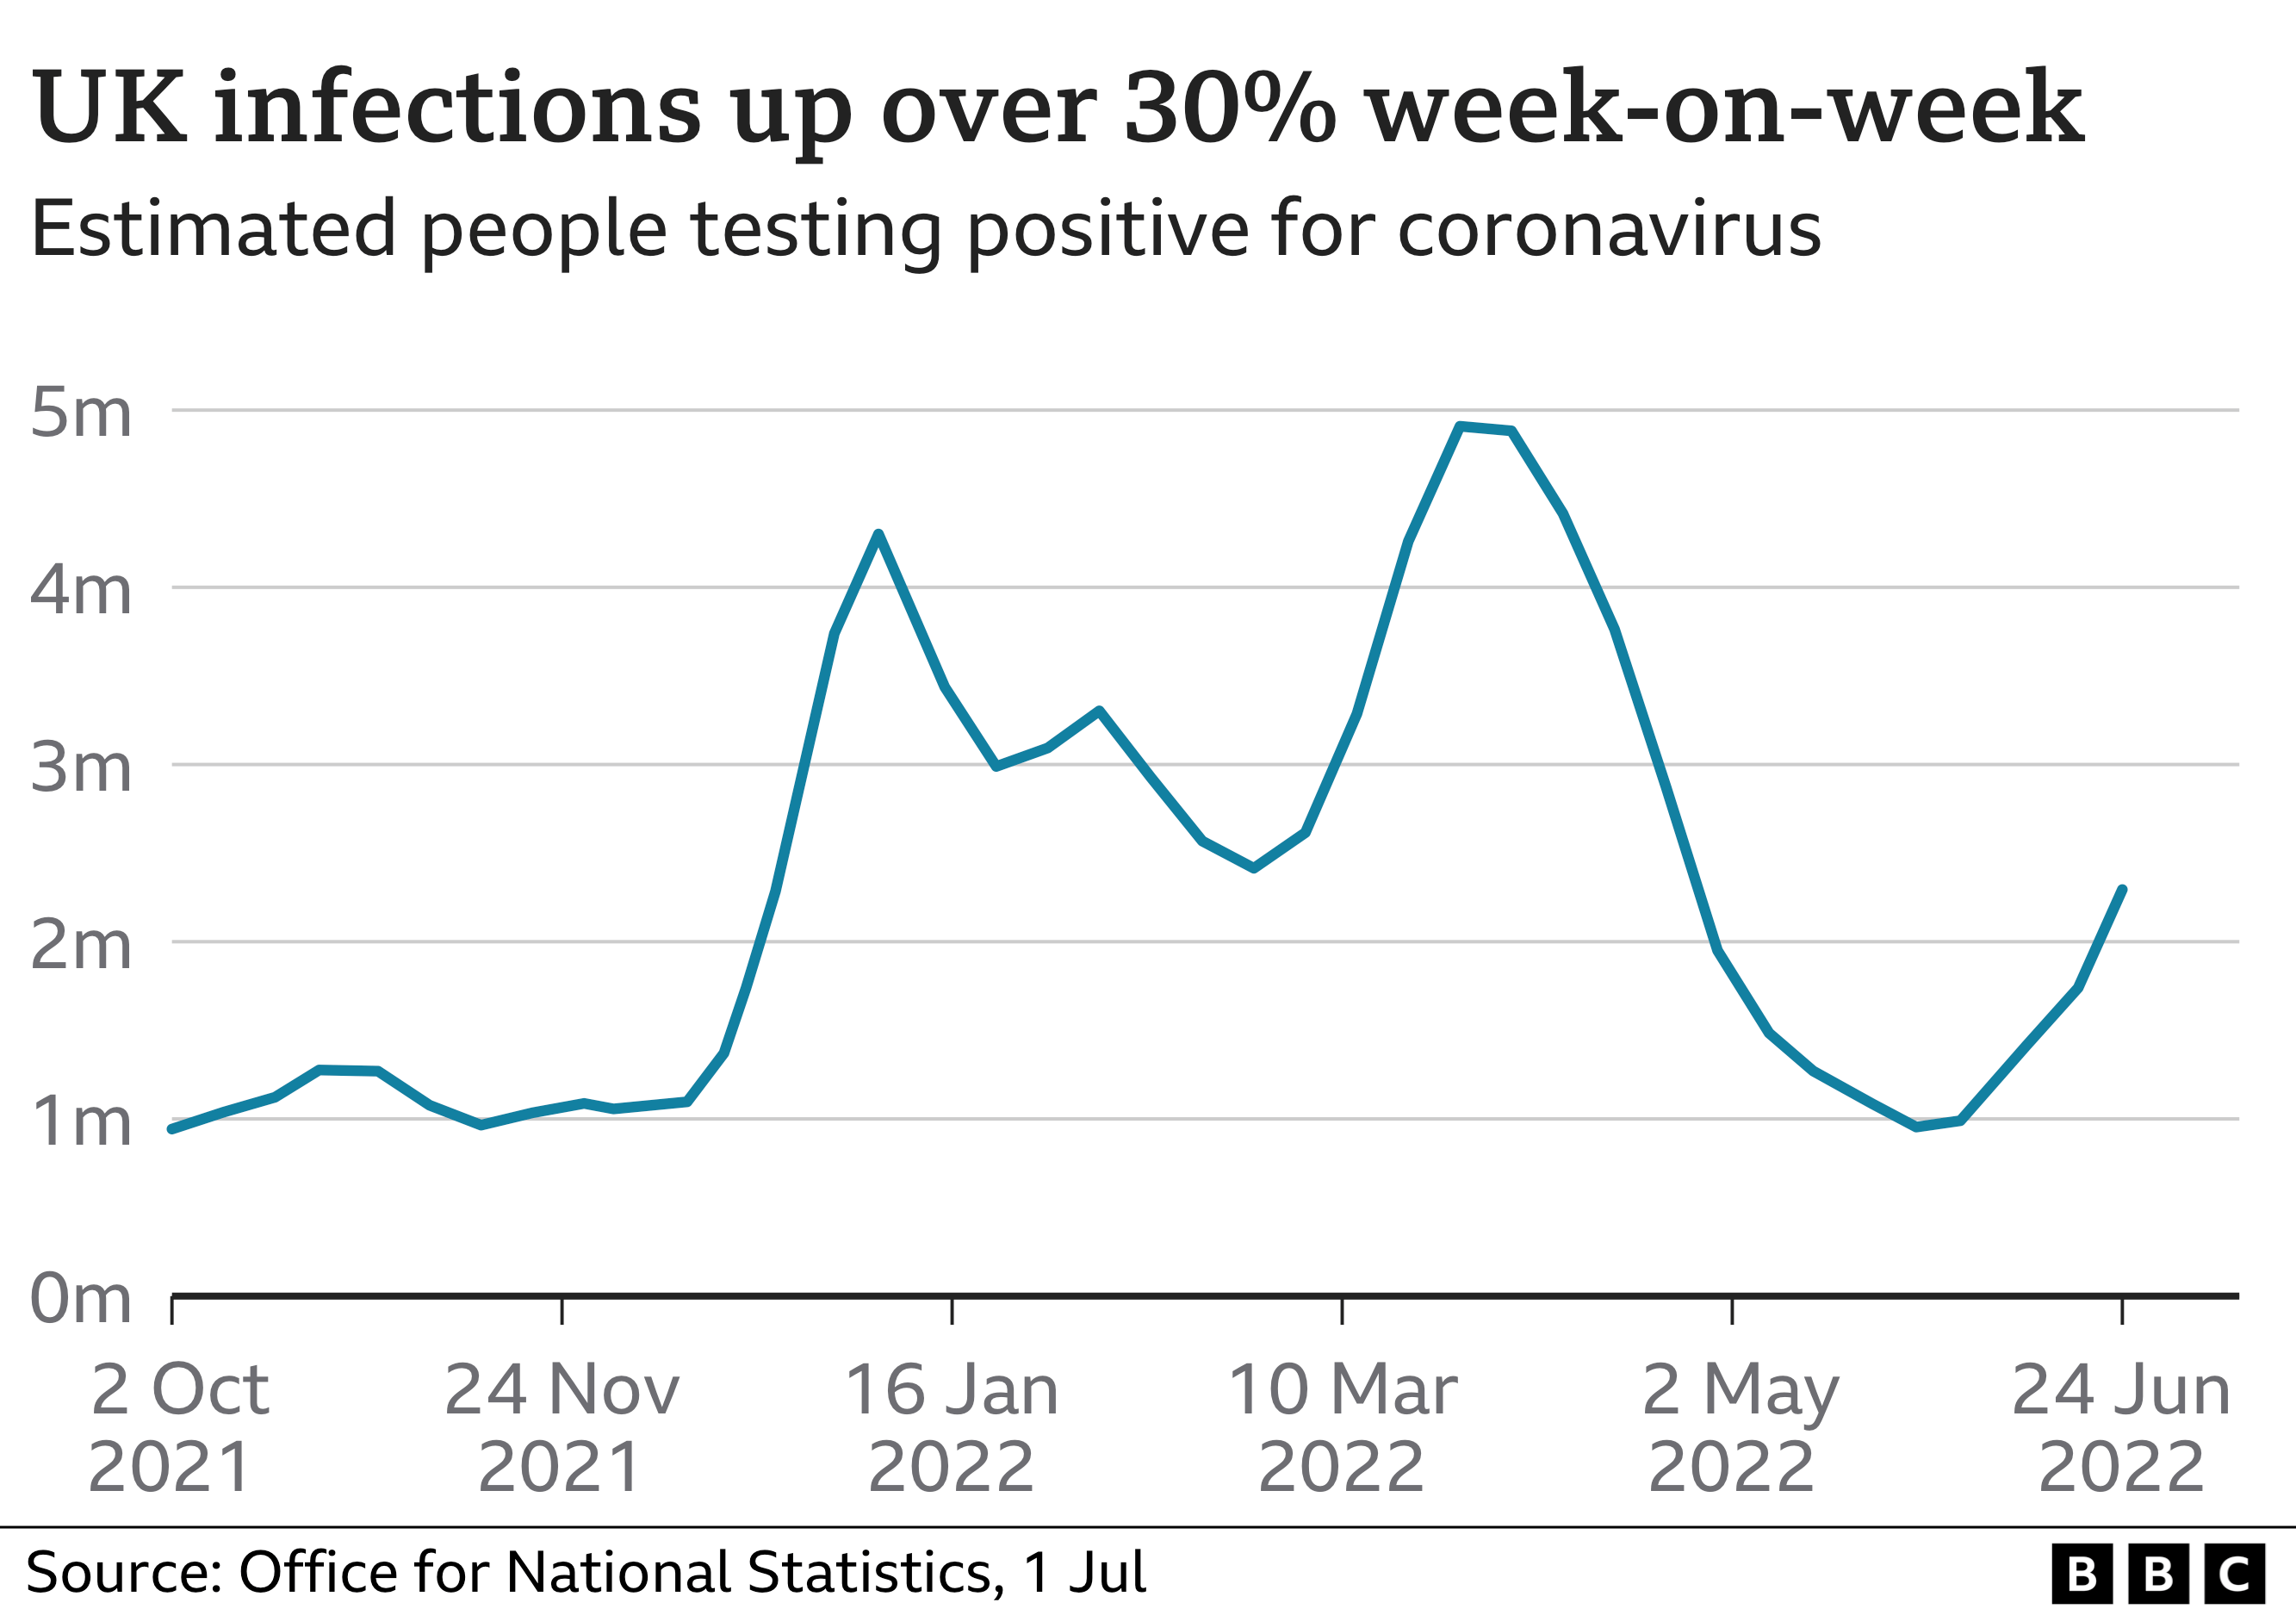 Covid infections up by more than 30% in UK